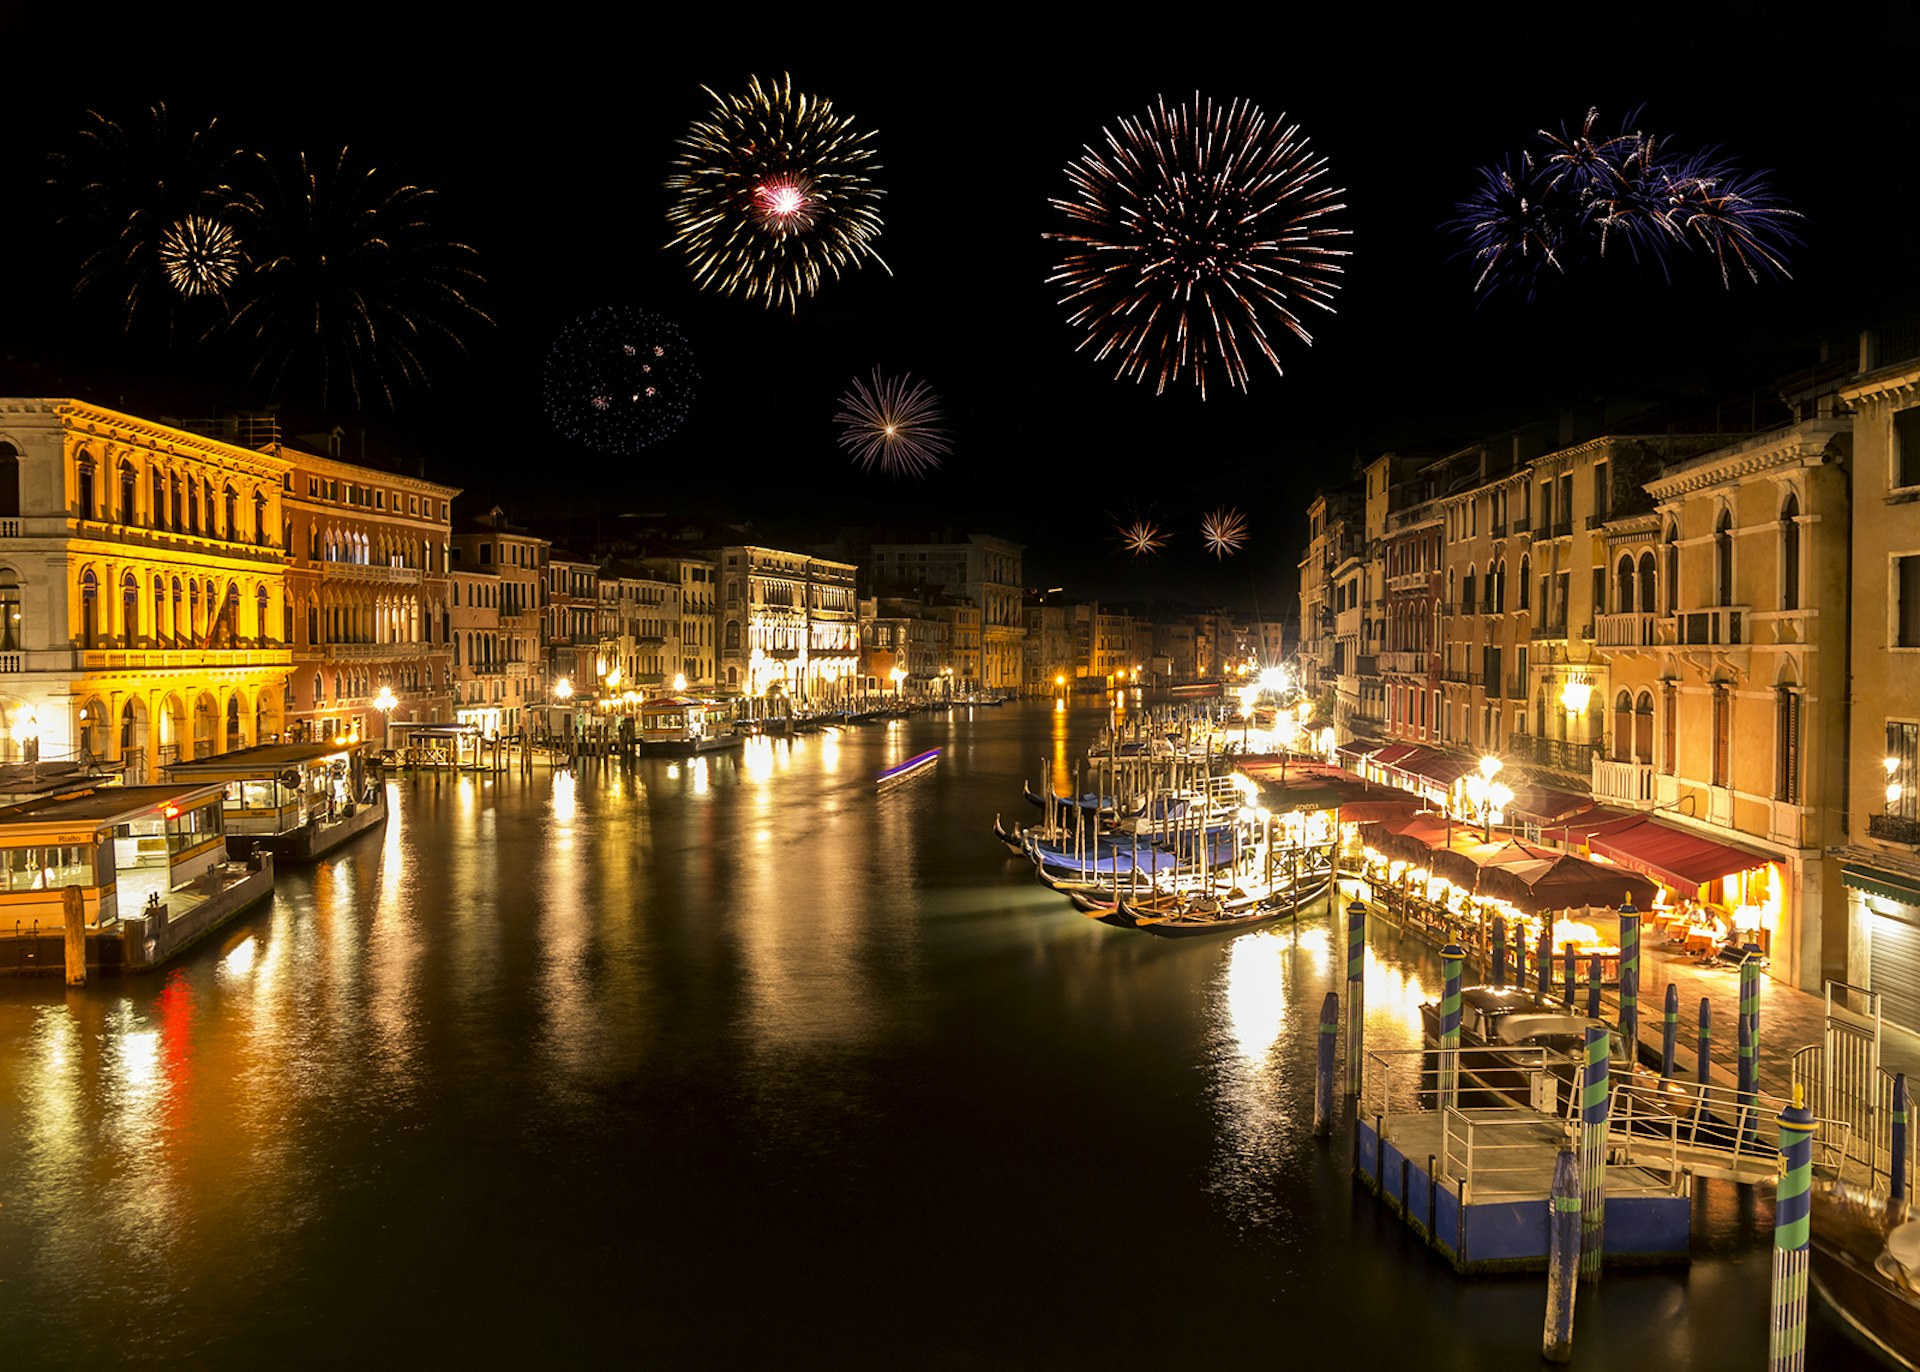 Venice's Grand Canal with fireworks in the night sky © SP-Photo / Shutterstock